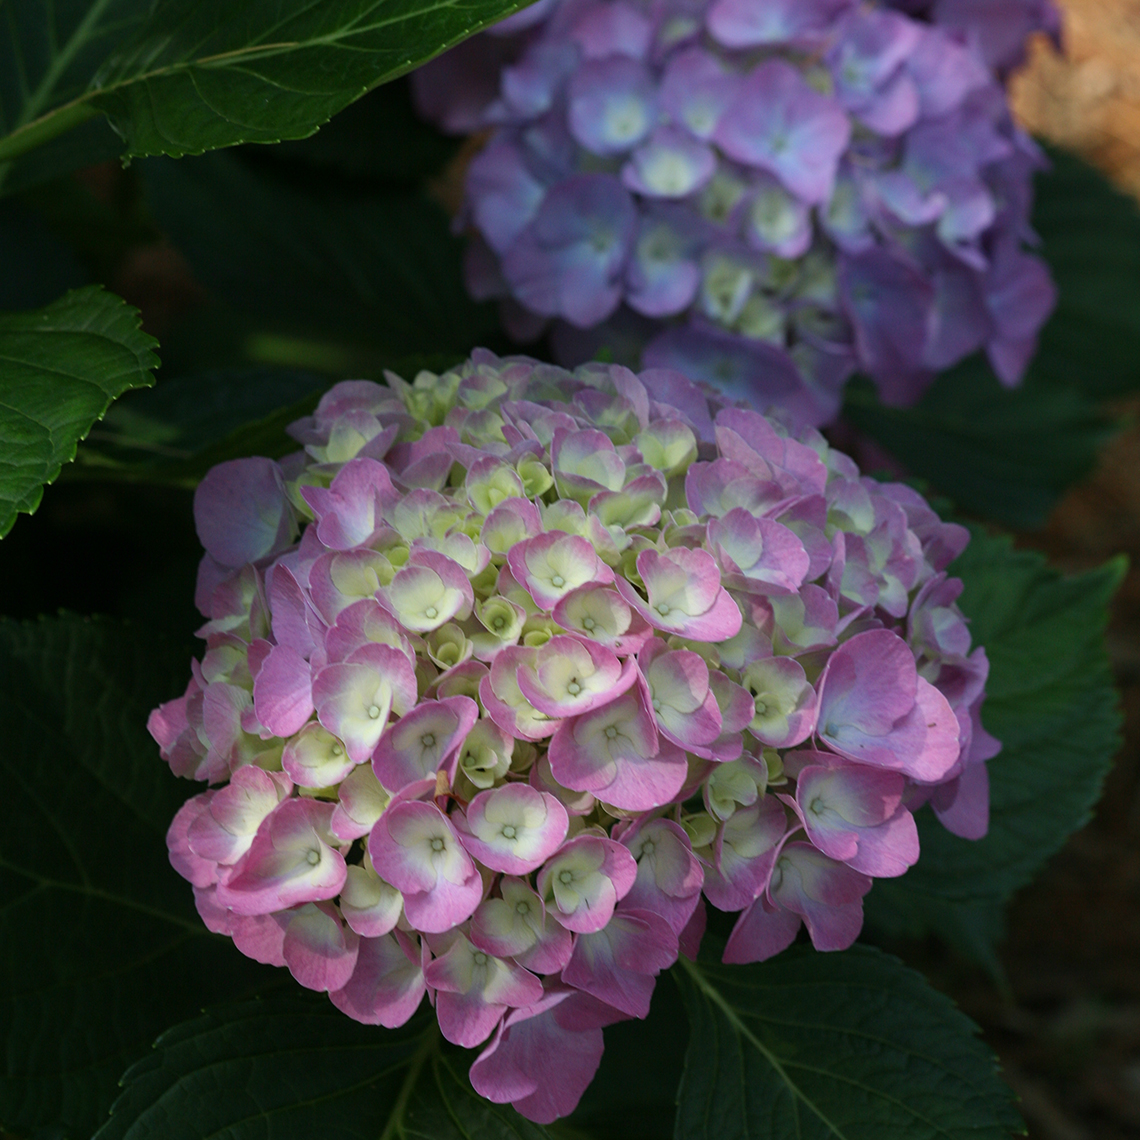 Cityline Berlin hydrangea flowers are pink with a white center